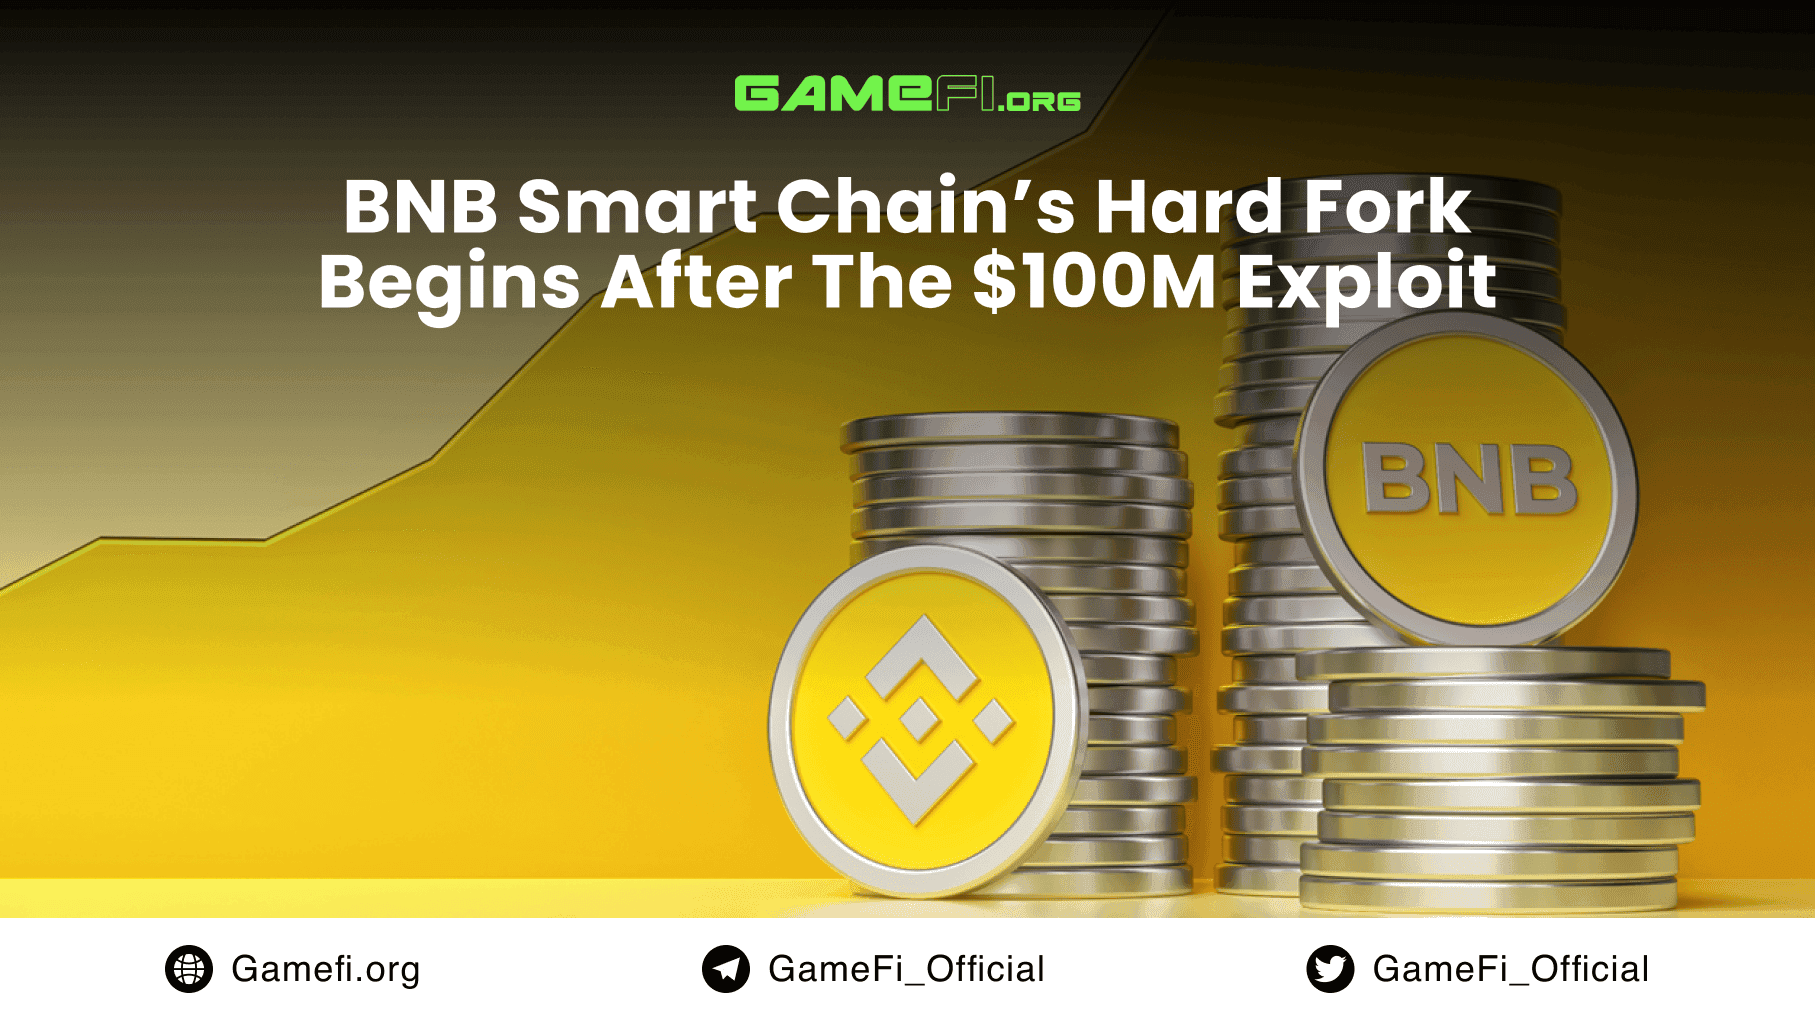 BNB Smart Chain’s Hard Fork Begins After the Exploitation of $100M